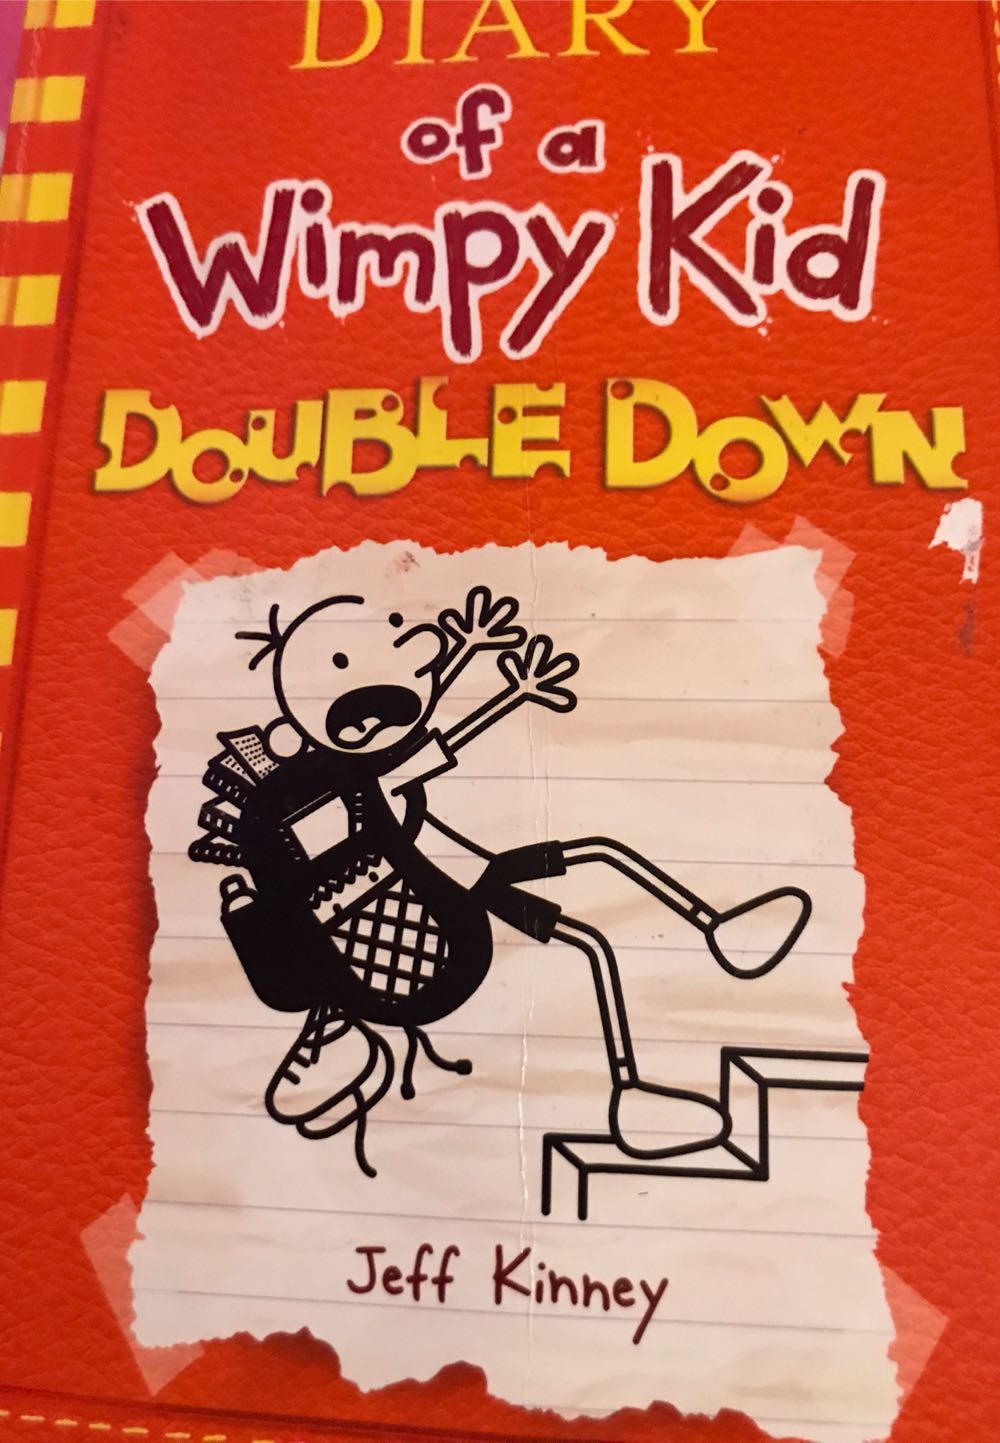 Diary Of A Wimpy Kid: Double Down - (K11) Jeff Kinney (Amulet Books - Paperback) book collectible [Barcode 9781419724862] - Main Image 3